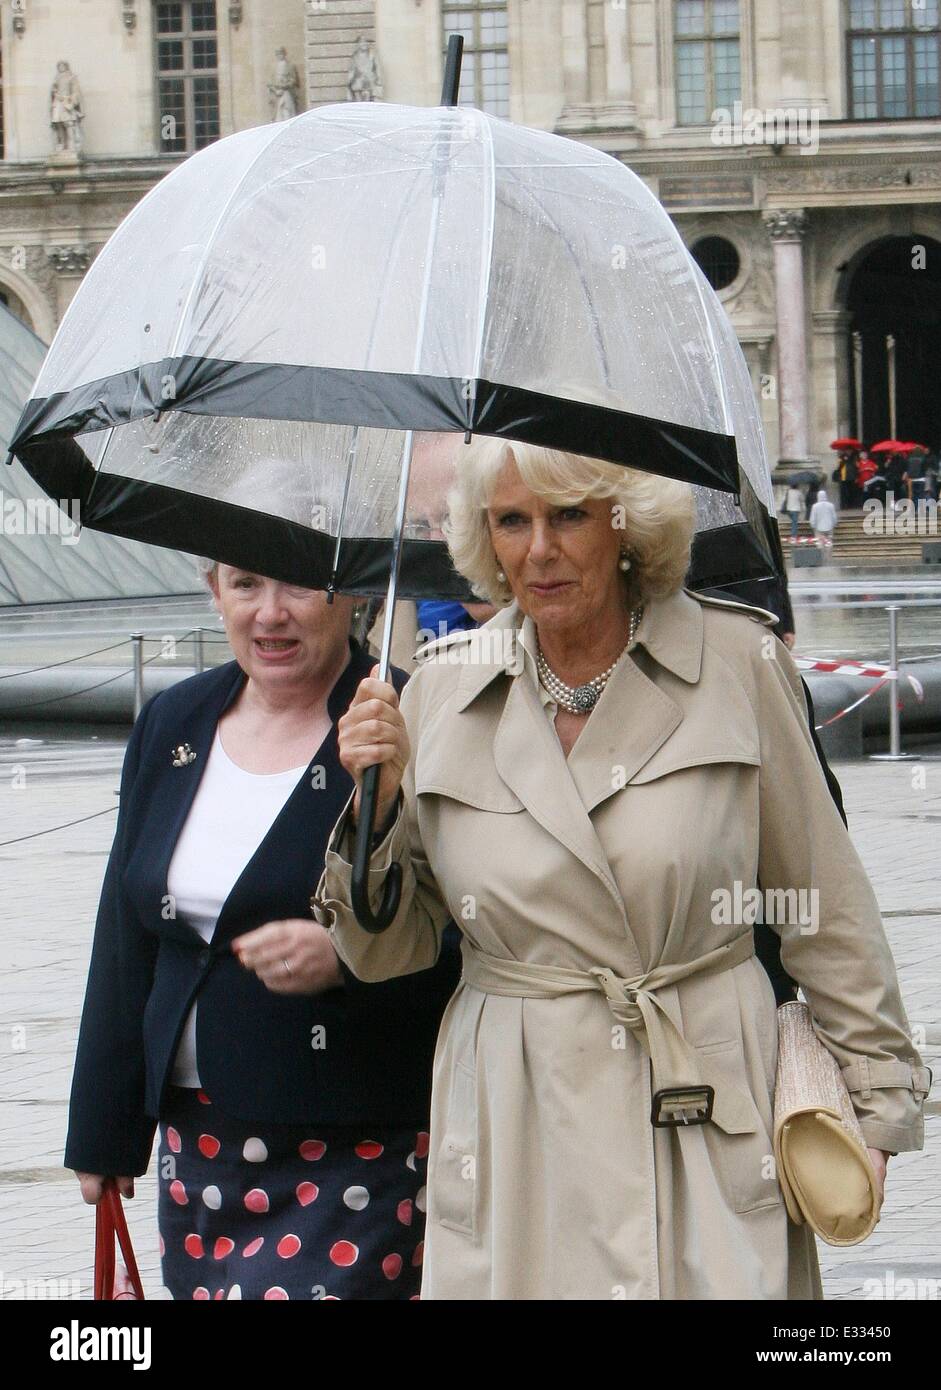 camilla-duchess-of-cornwall-visits-the-louvre-museum-on-a-rainy-day-E33450.jpg